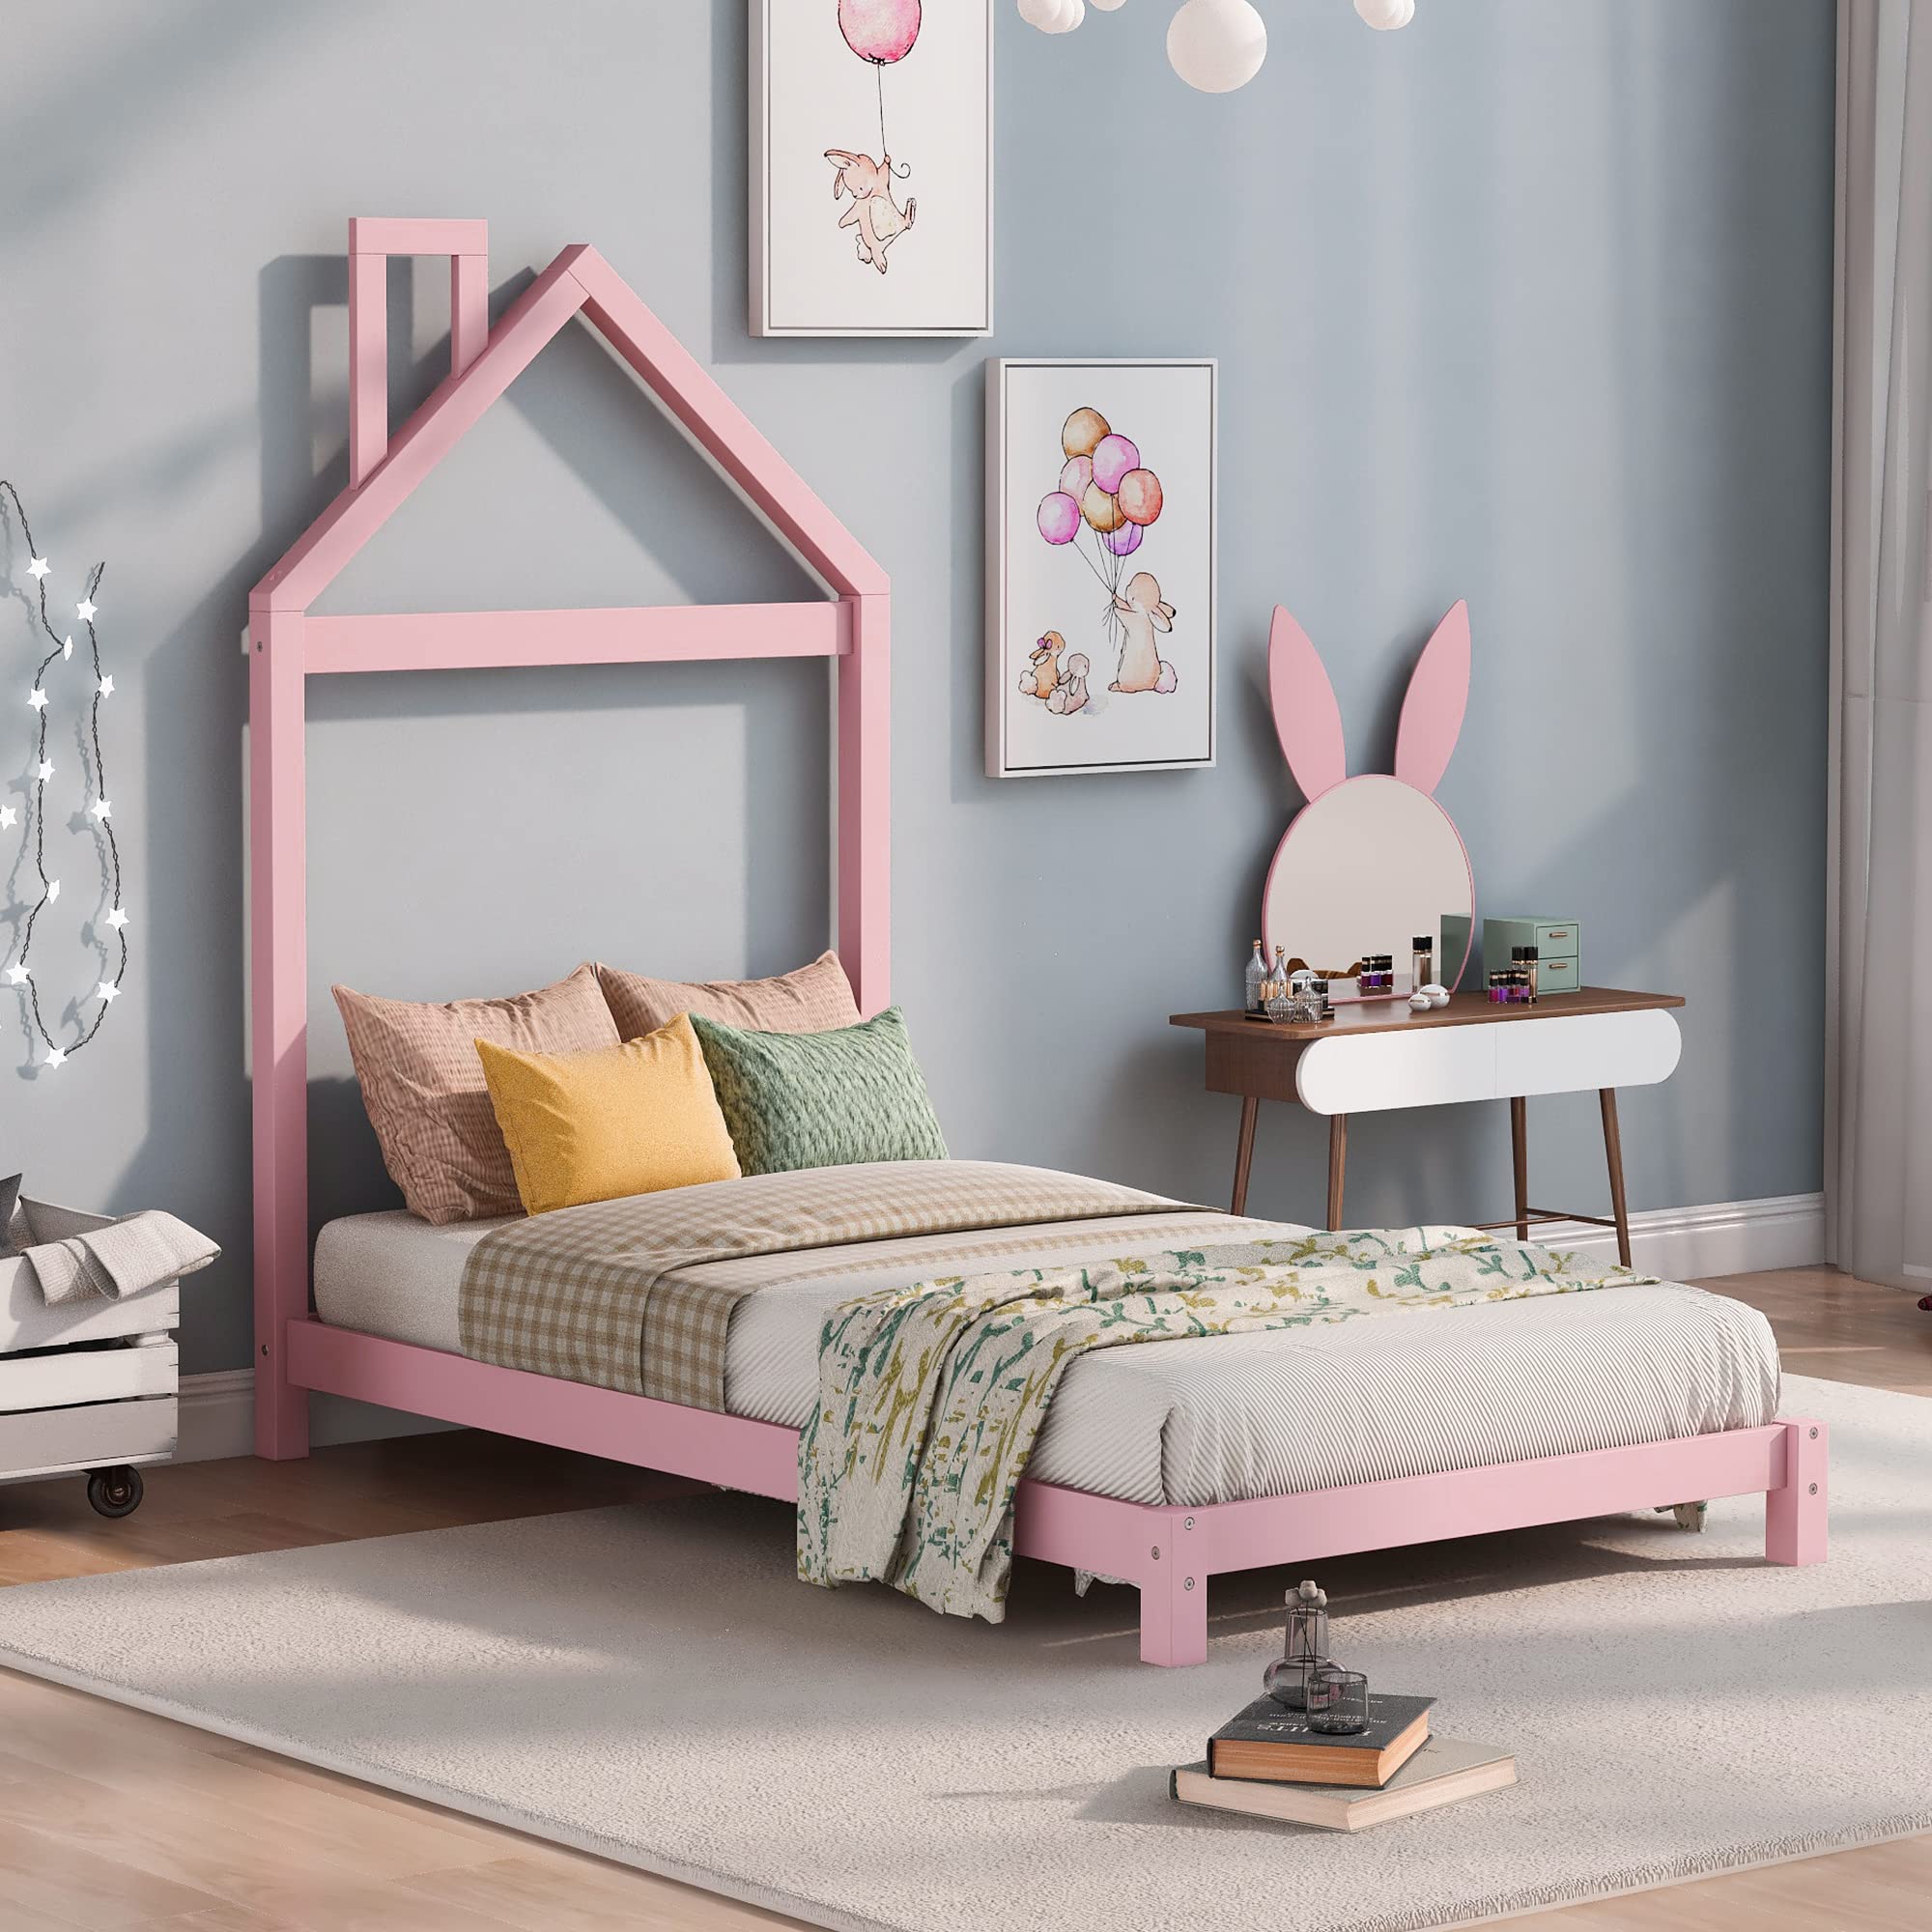 Lostcat Twin Size Wood Platform Bed with House-Shaped Headboard,Solid Wood Bedframe for Kids/Teen/Adults Bedroom,No Box Spring Needed,Pink - Lostcat